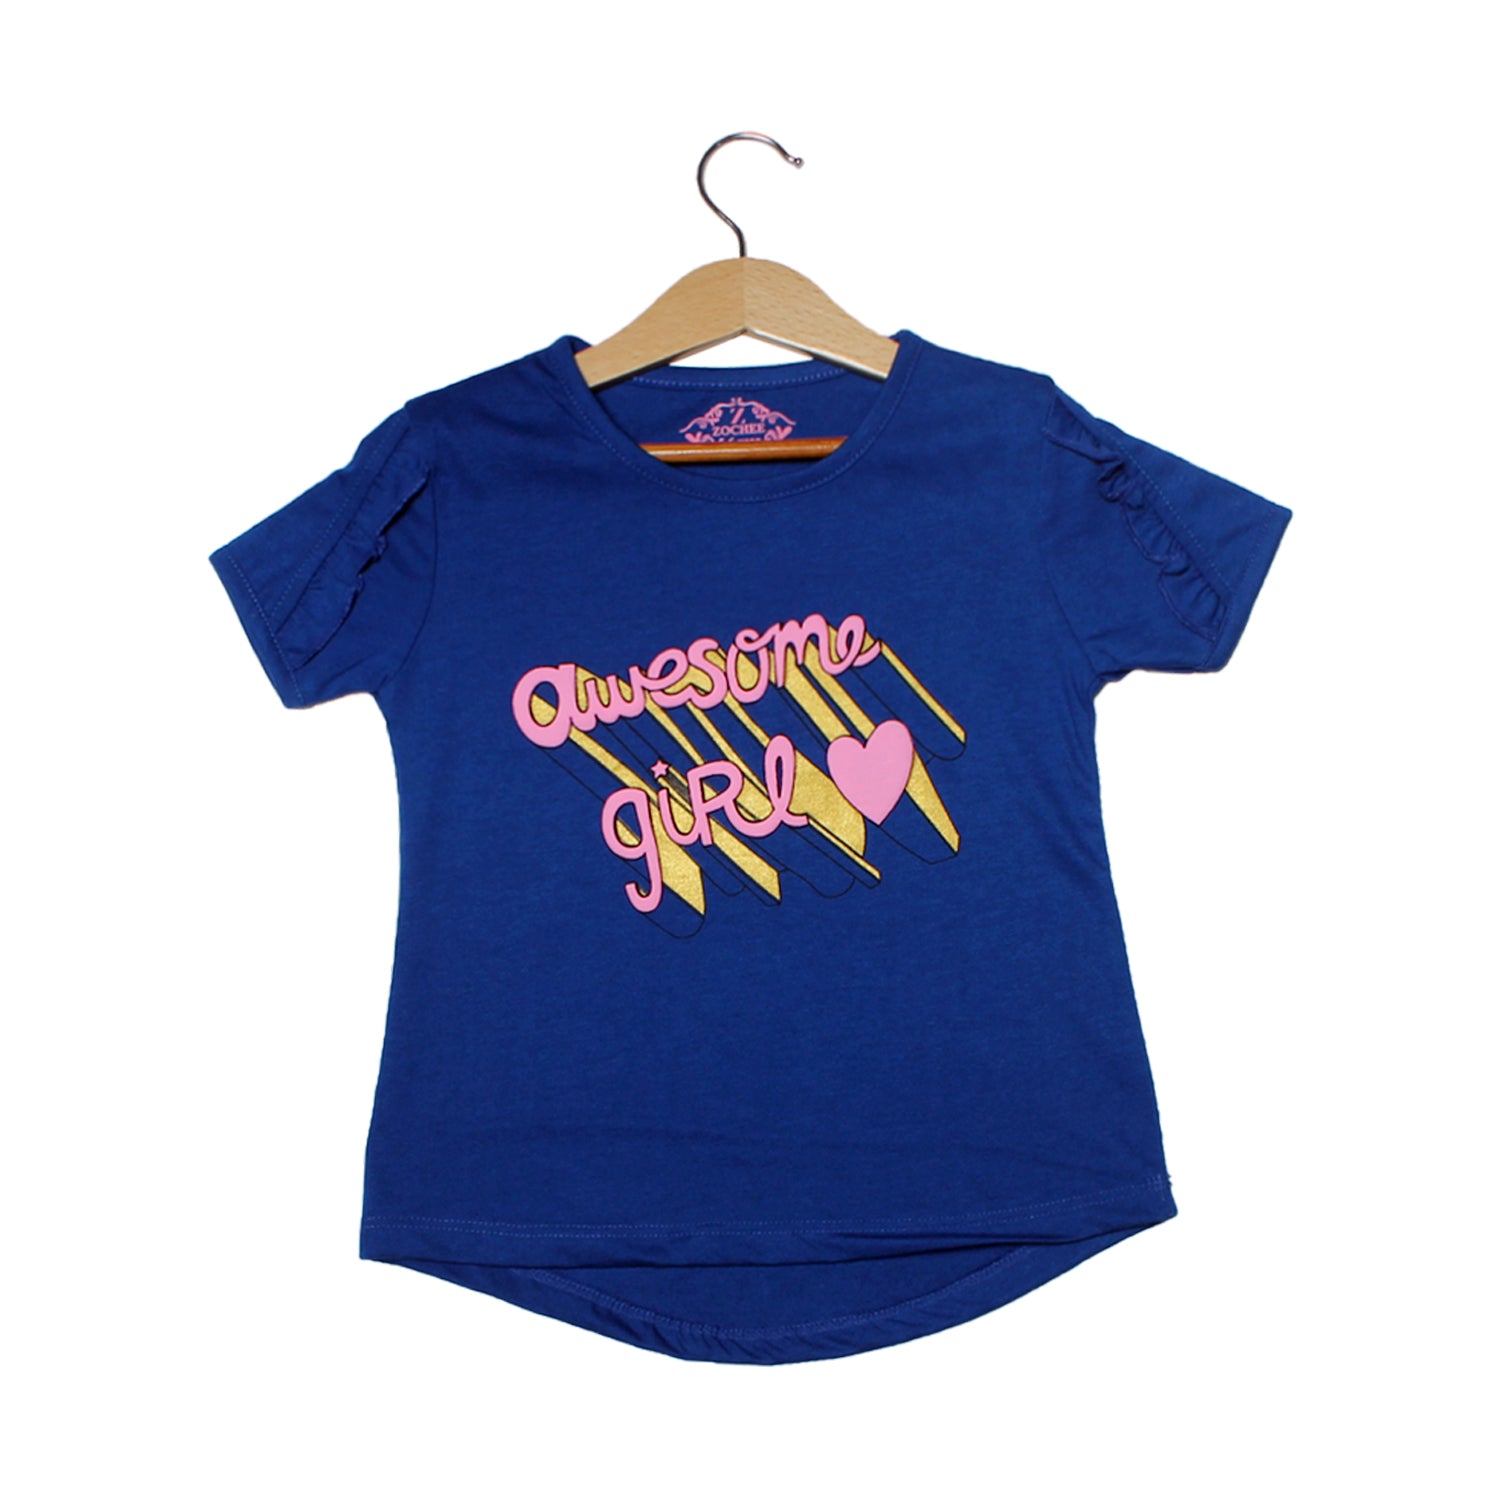 NEW ROYAL BLUE AWESOME GIRL PRINTED T-SHIRT TOP FOR GIRLS